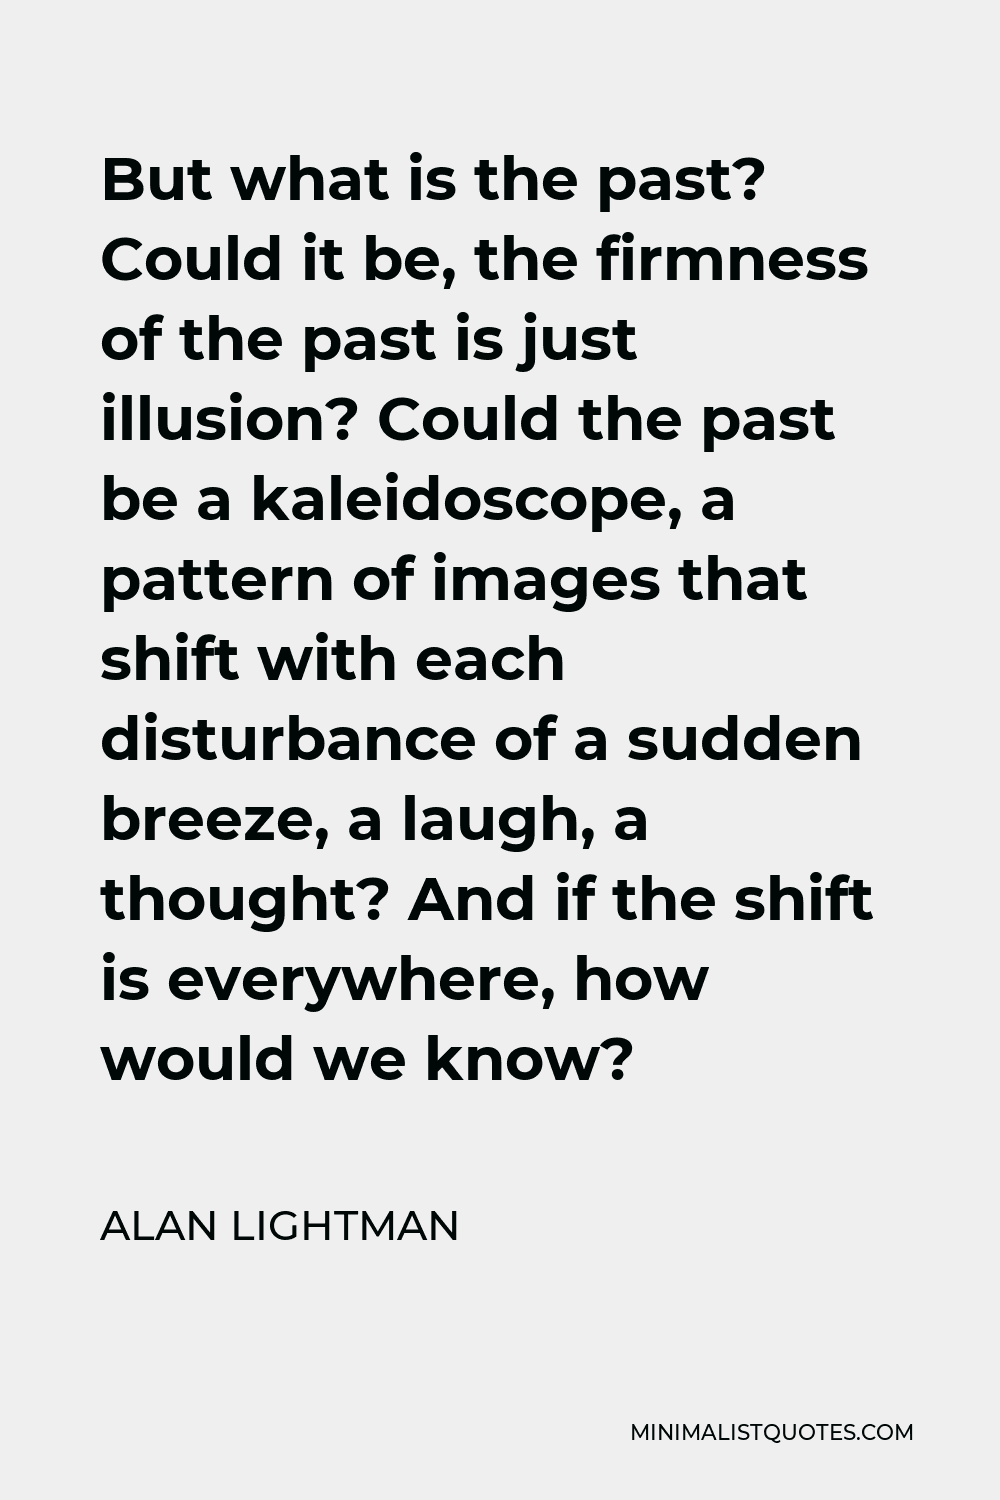 Alan Lightman Quote - But what is the past? Could it be, the firmness of the past is just illusion? Could the past be a kaleidoscope, a pattern of images that shift with each disturbance of a sudden breeze, a laugh, a thought? And if the shift is everywhere, how would we know?